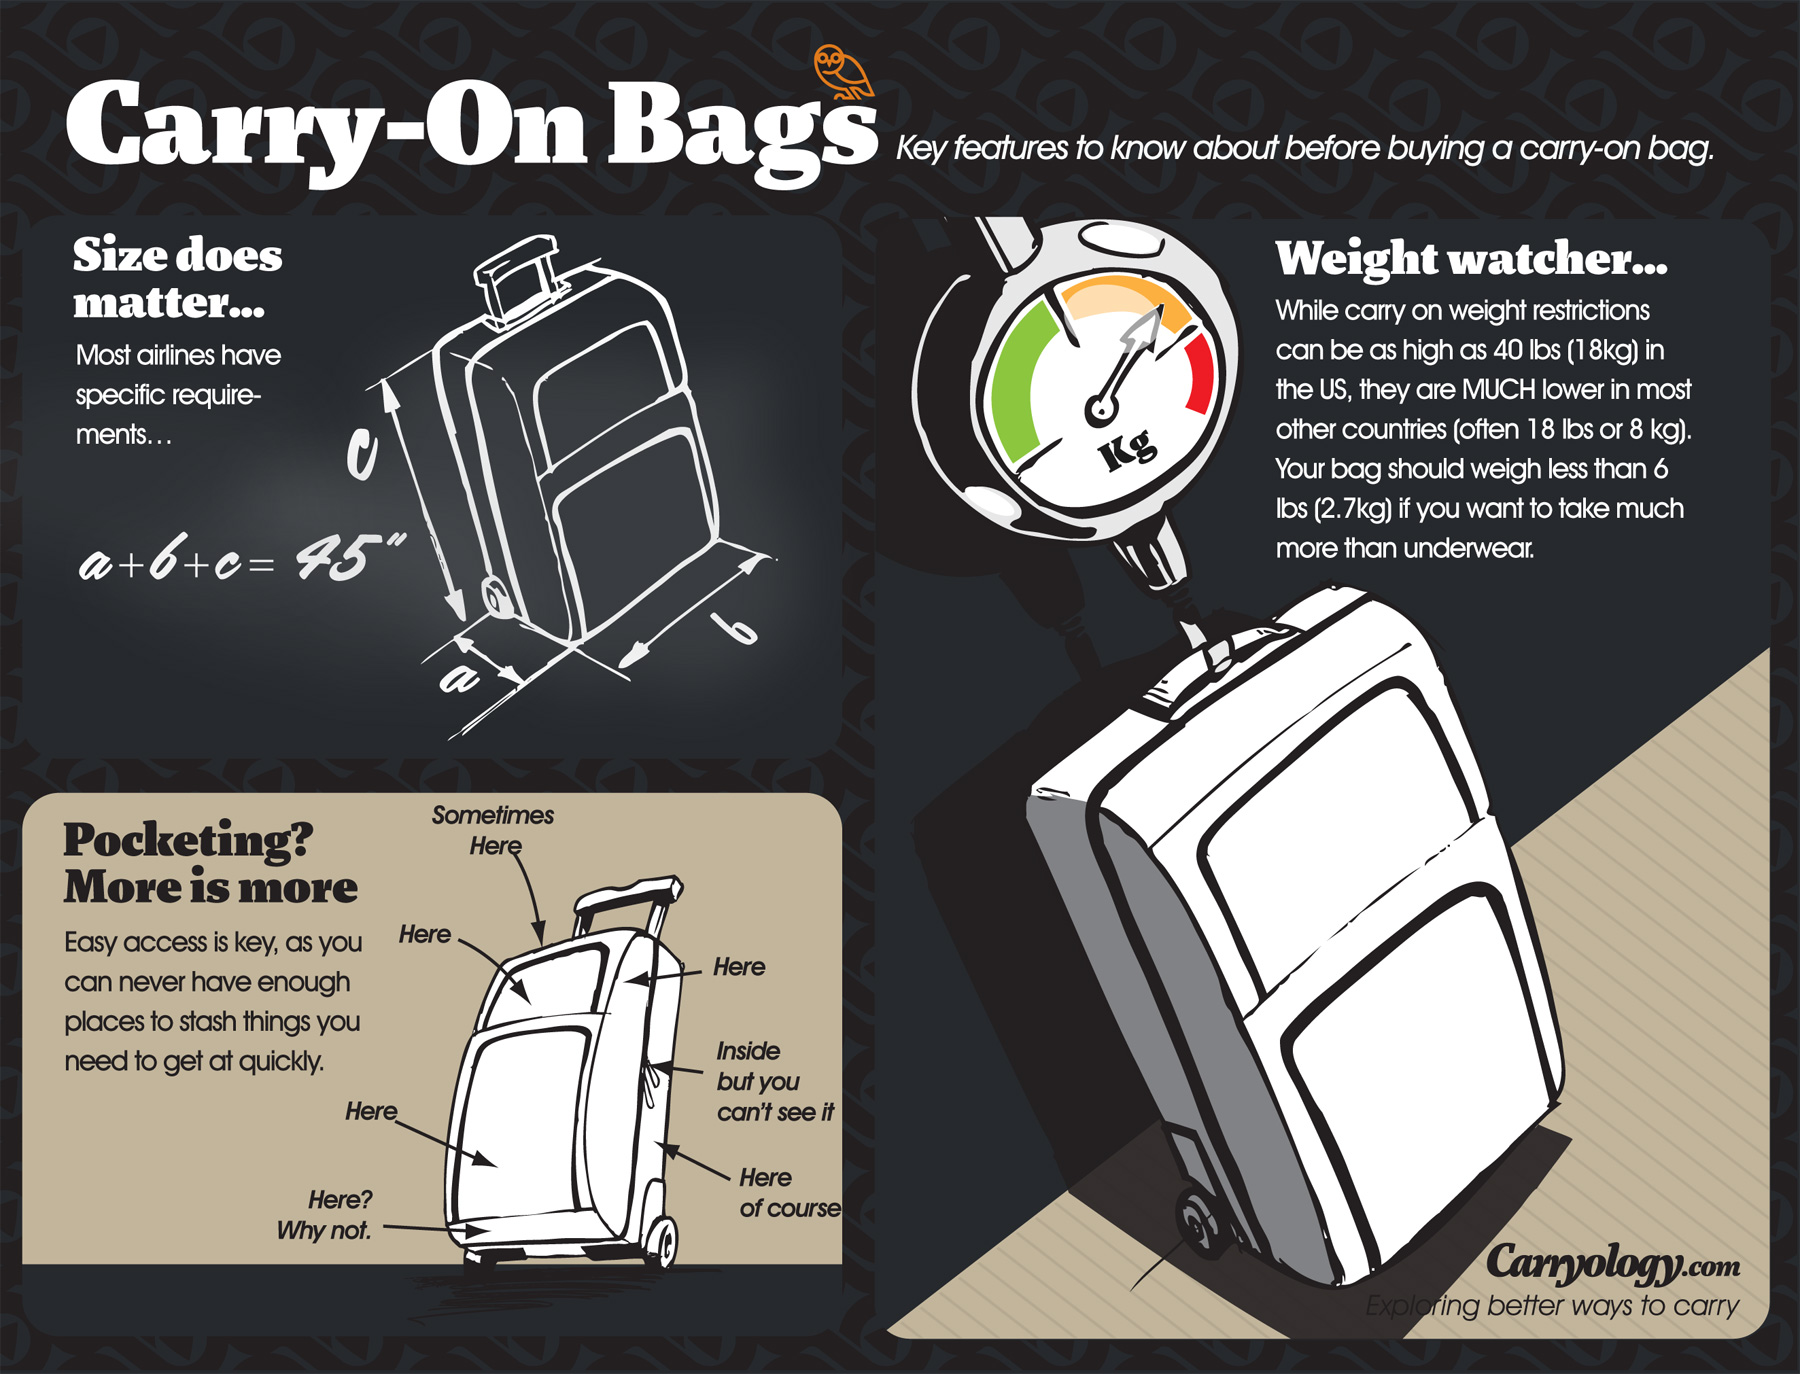 How To Choose The Right Size Duffle Bag For Your Trip